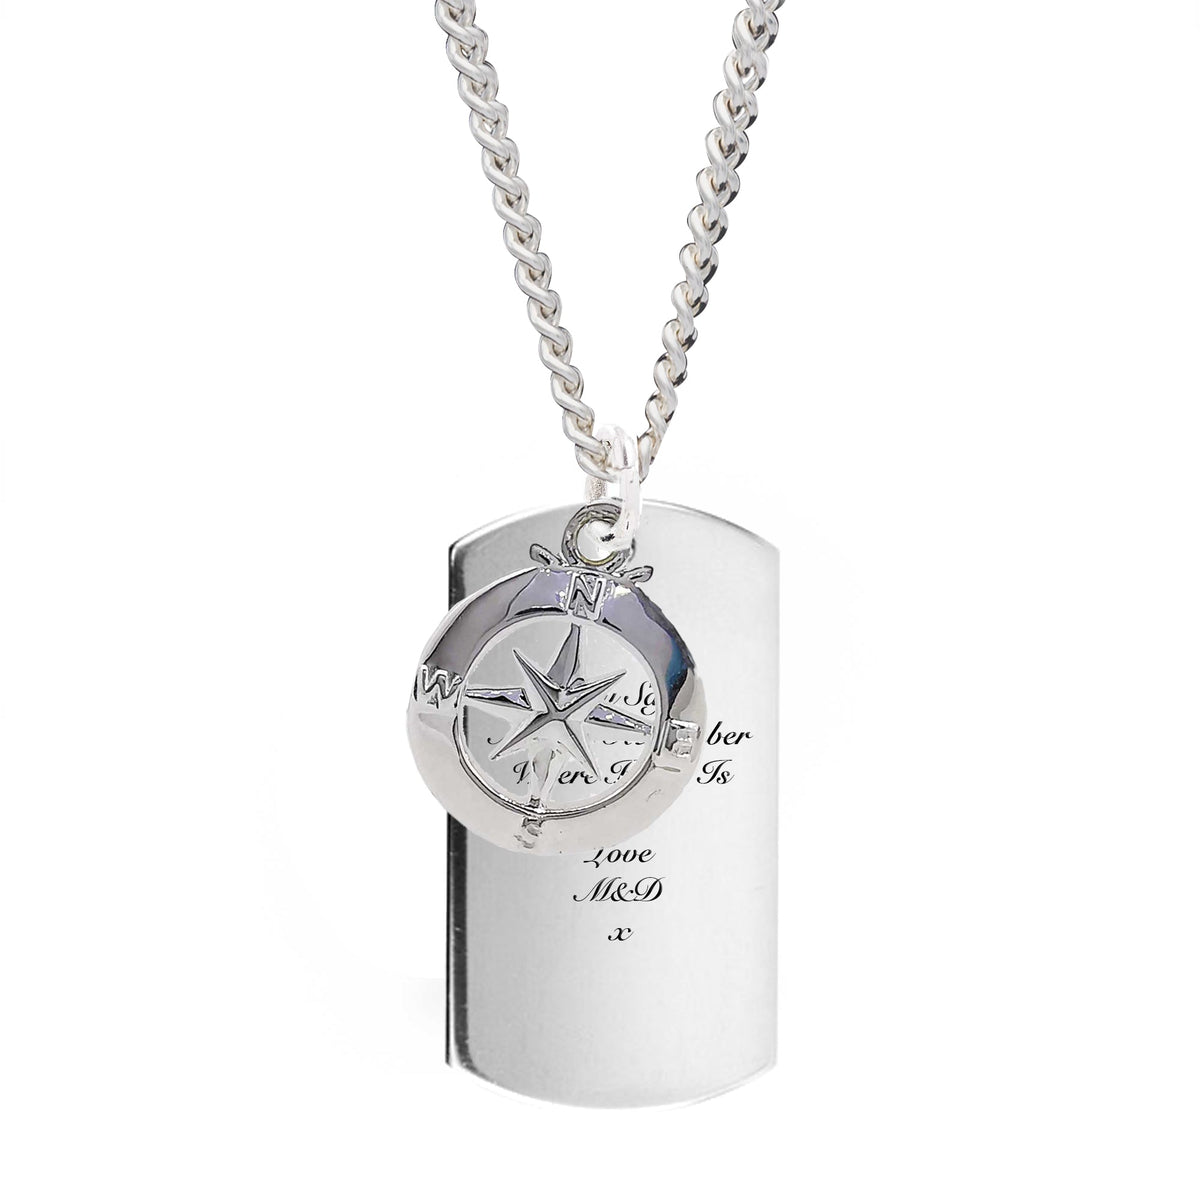 X-L Recycled Silver Dog Tag  Necklace With Enamel Compass